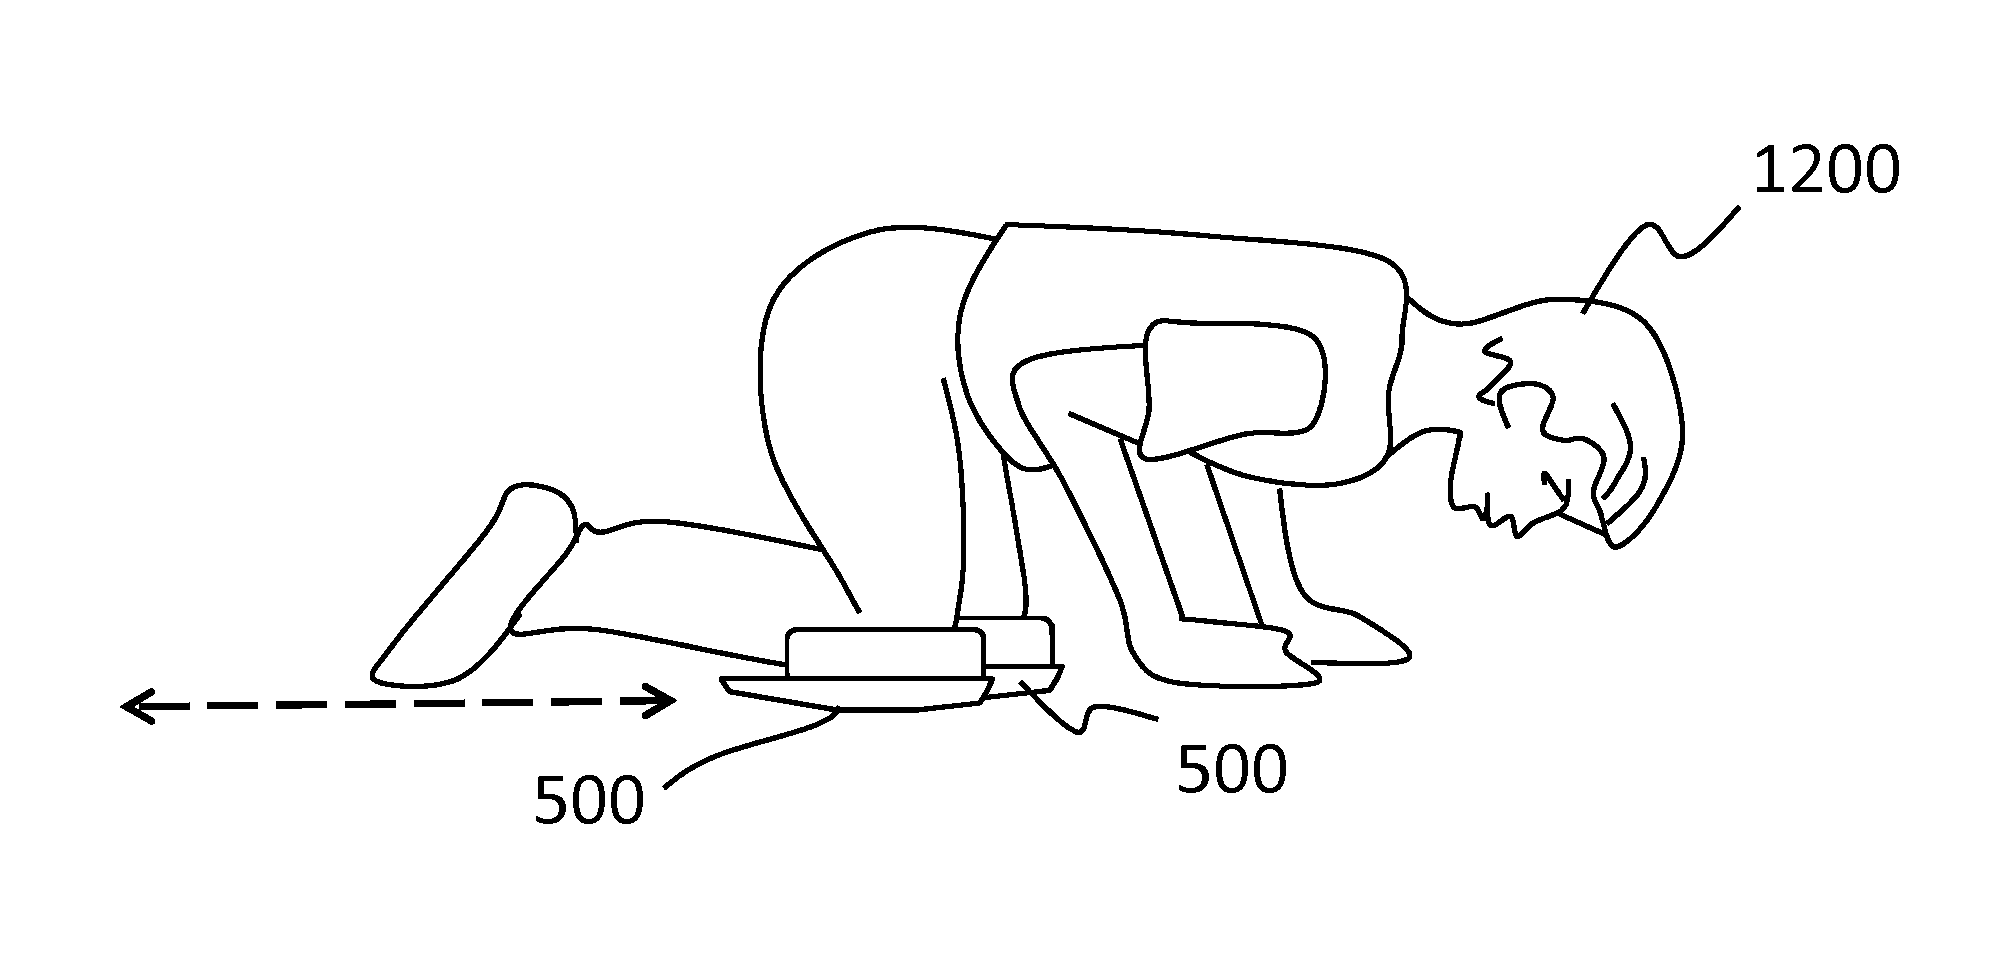 Extremity supporting and ground surface sliding exercise system